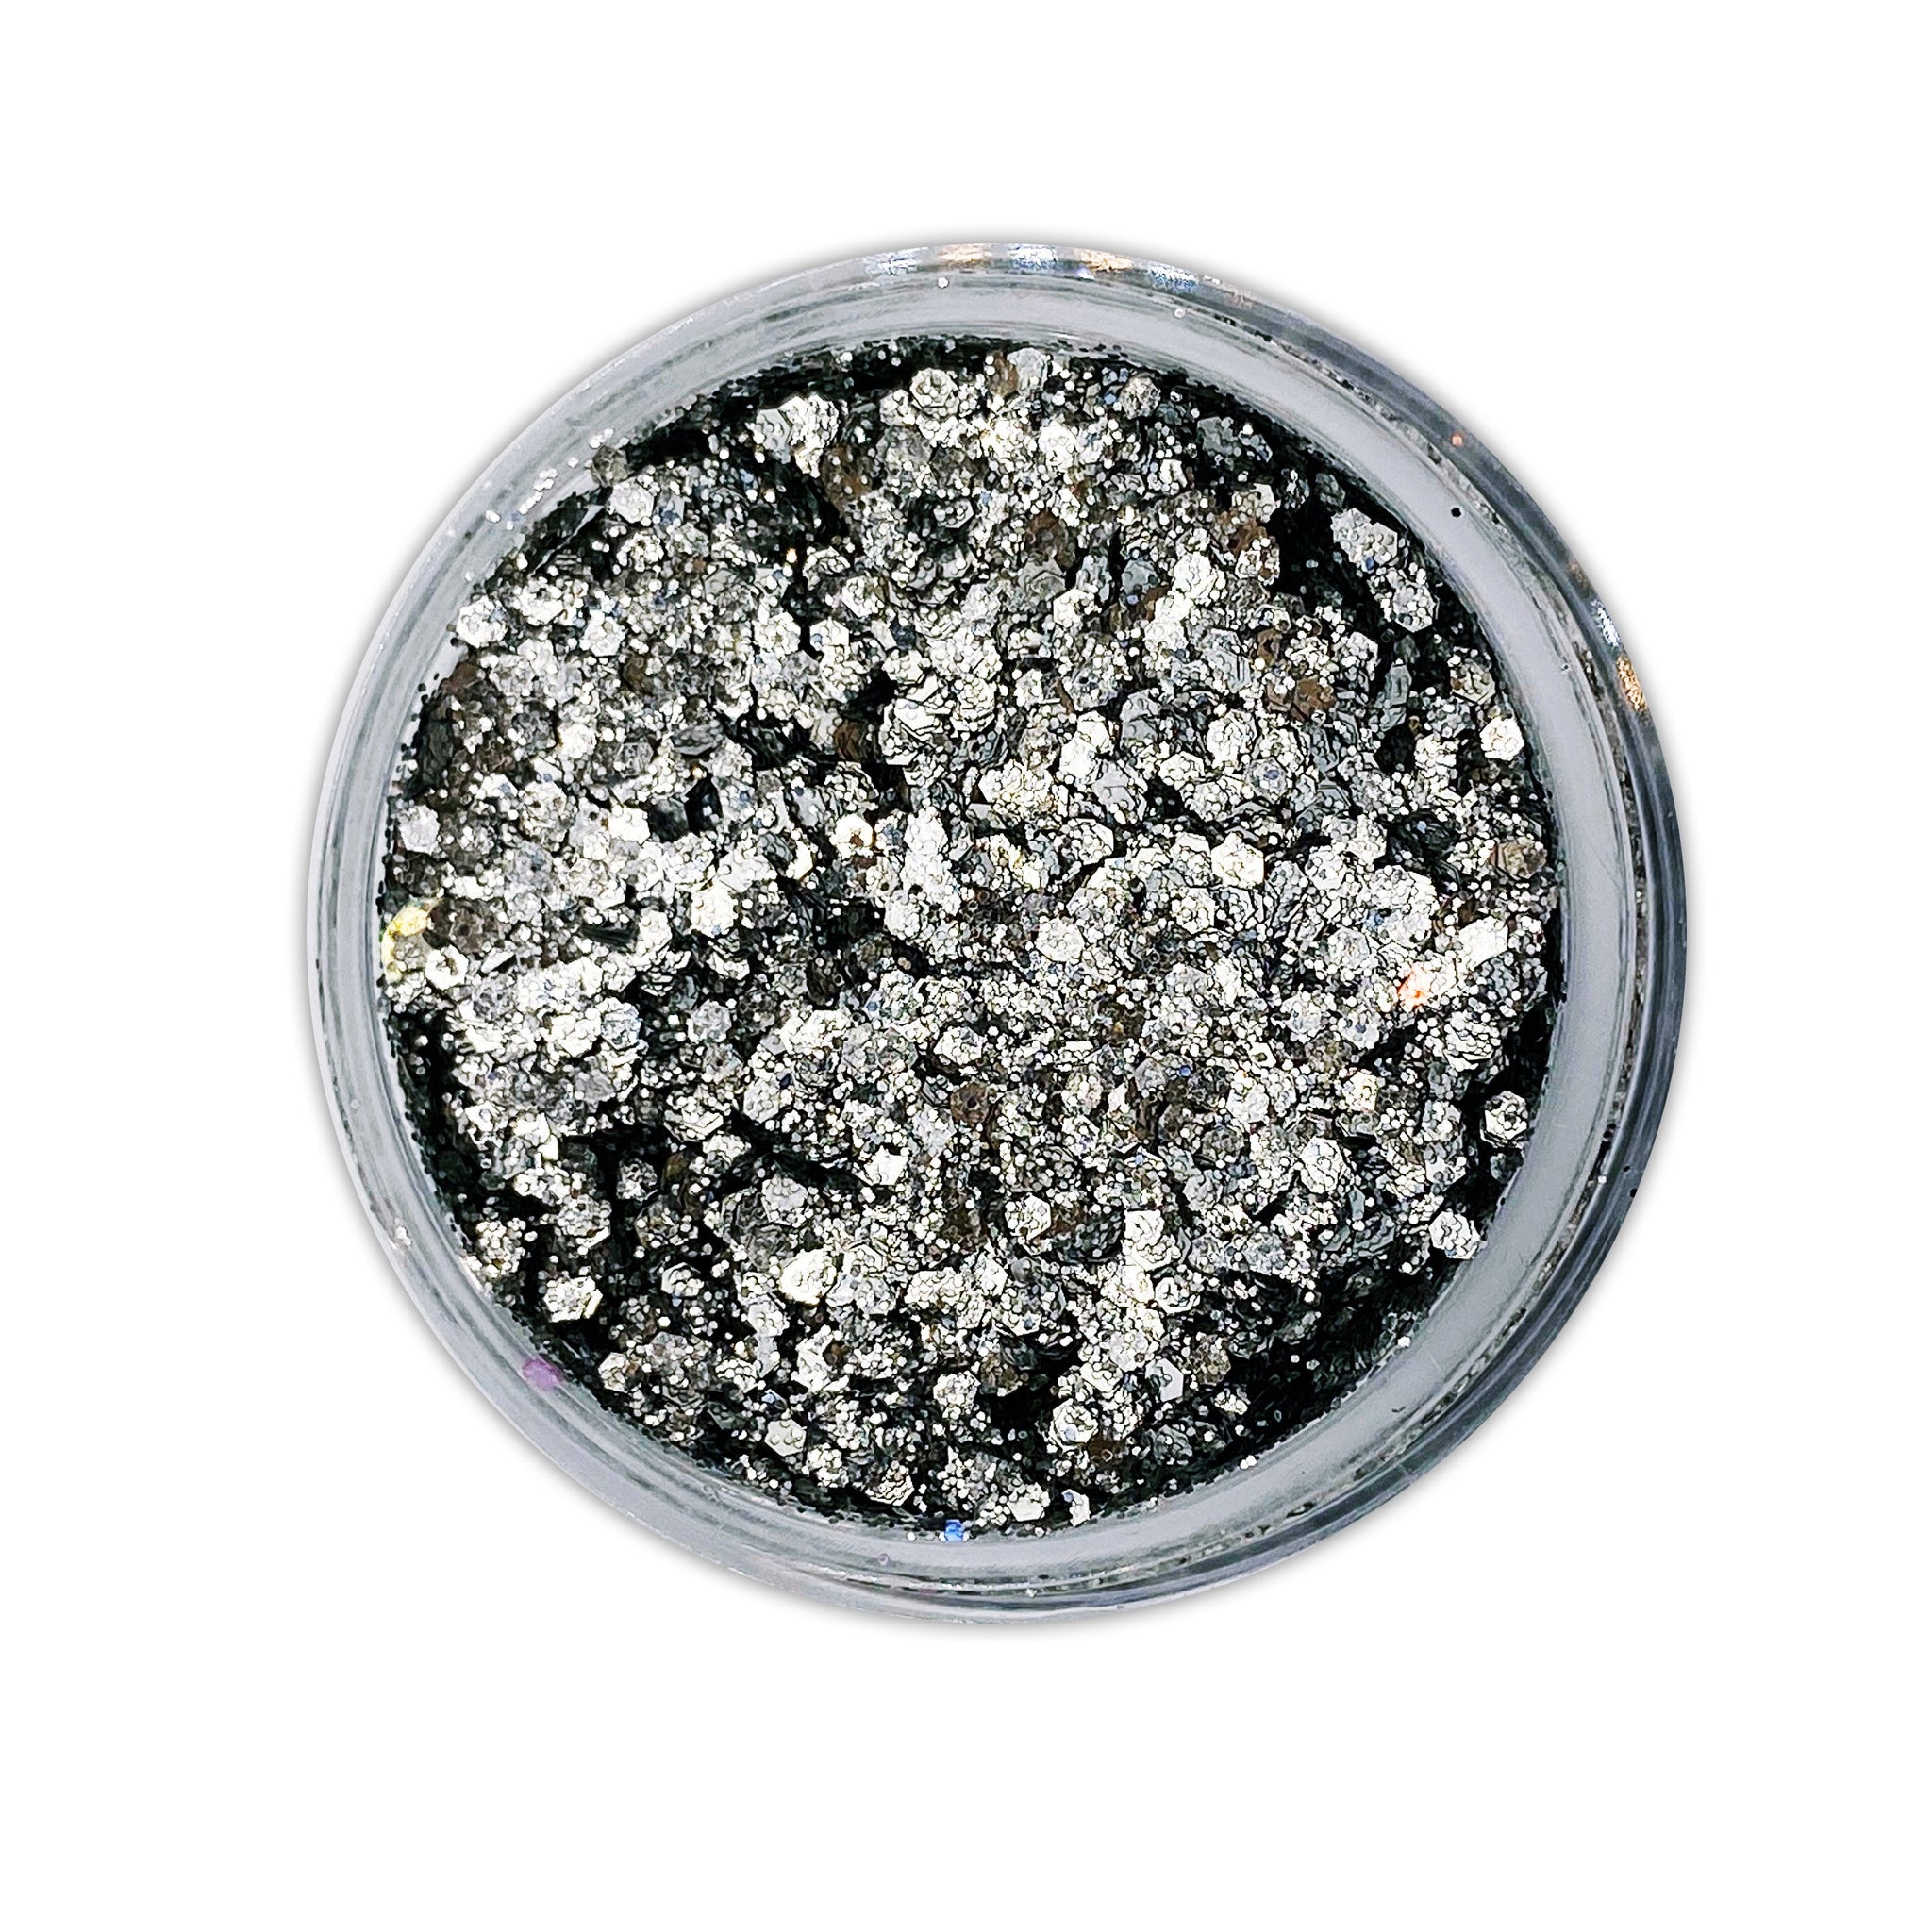 Protective varnish that makes silver glitter effect - Tegrastate